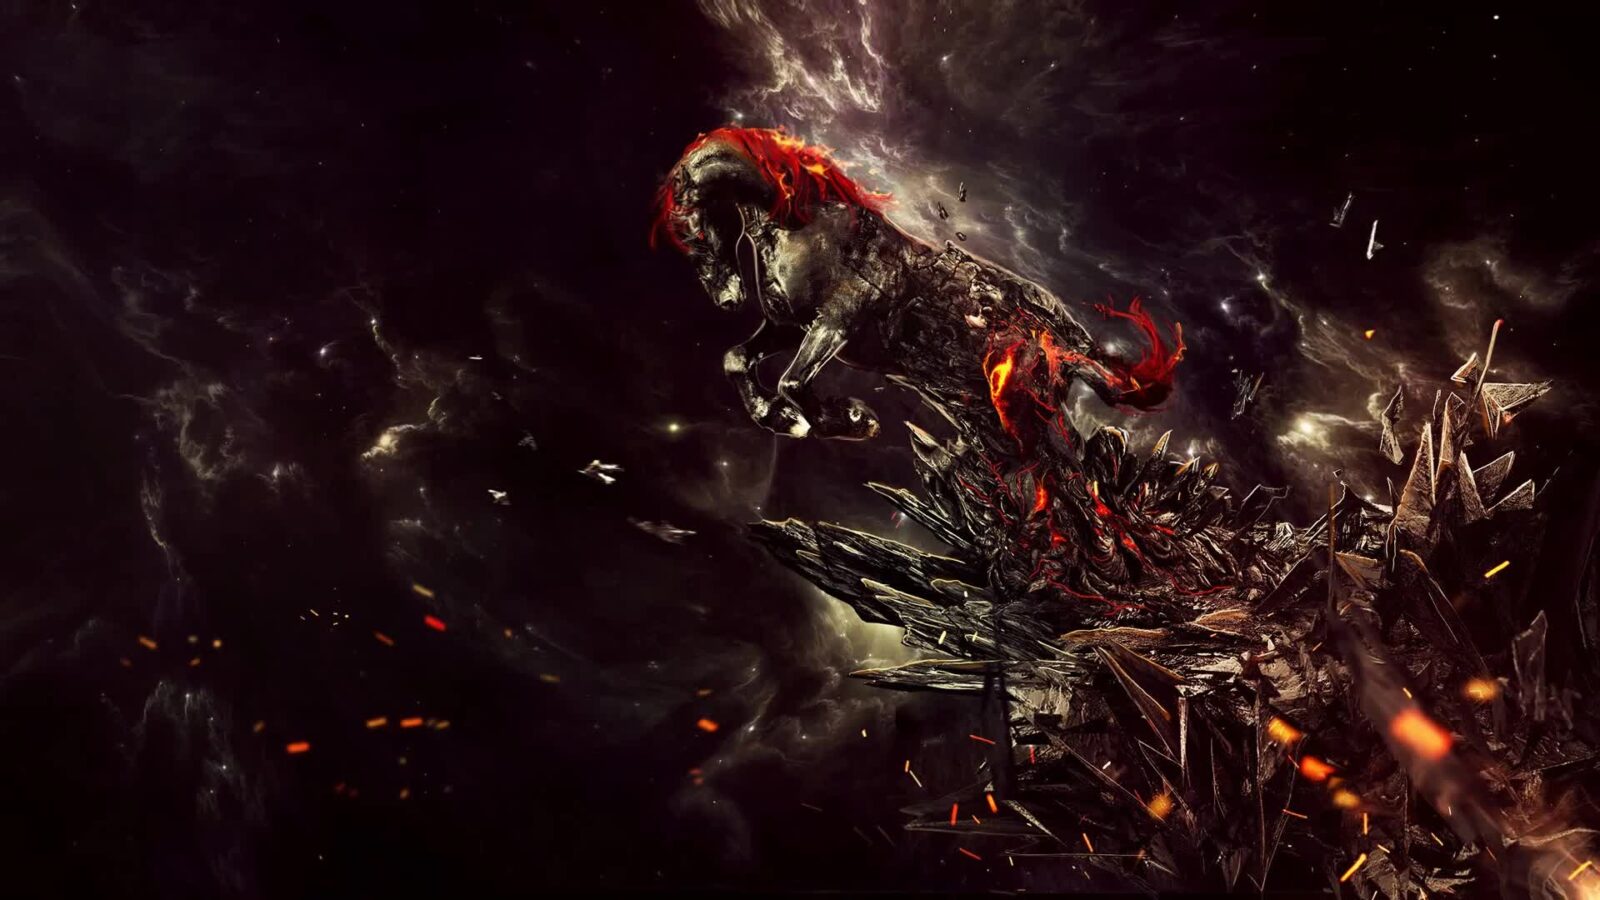 LiveWallpapers4Free.com | Escape From Hell Black Horse - Free Live Wallpaper